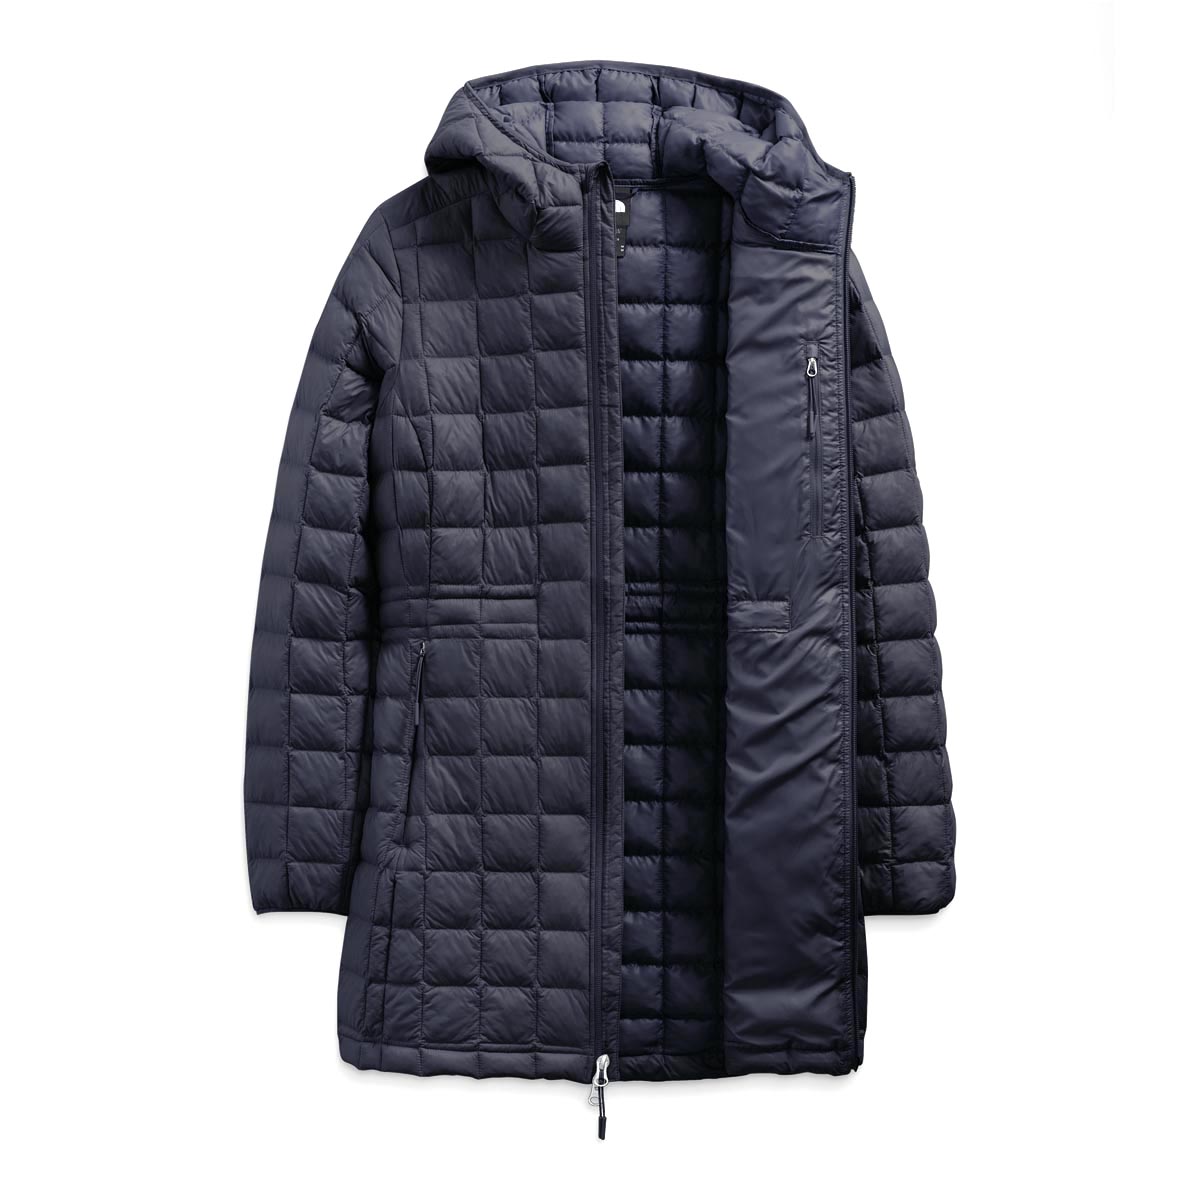 The North Face Women's Thermoball Eco Parka